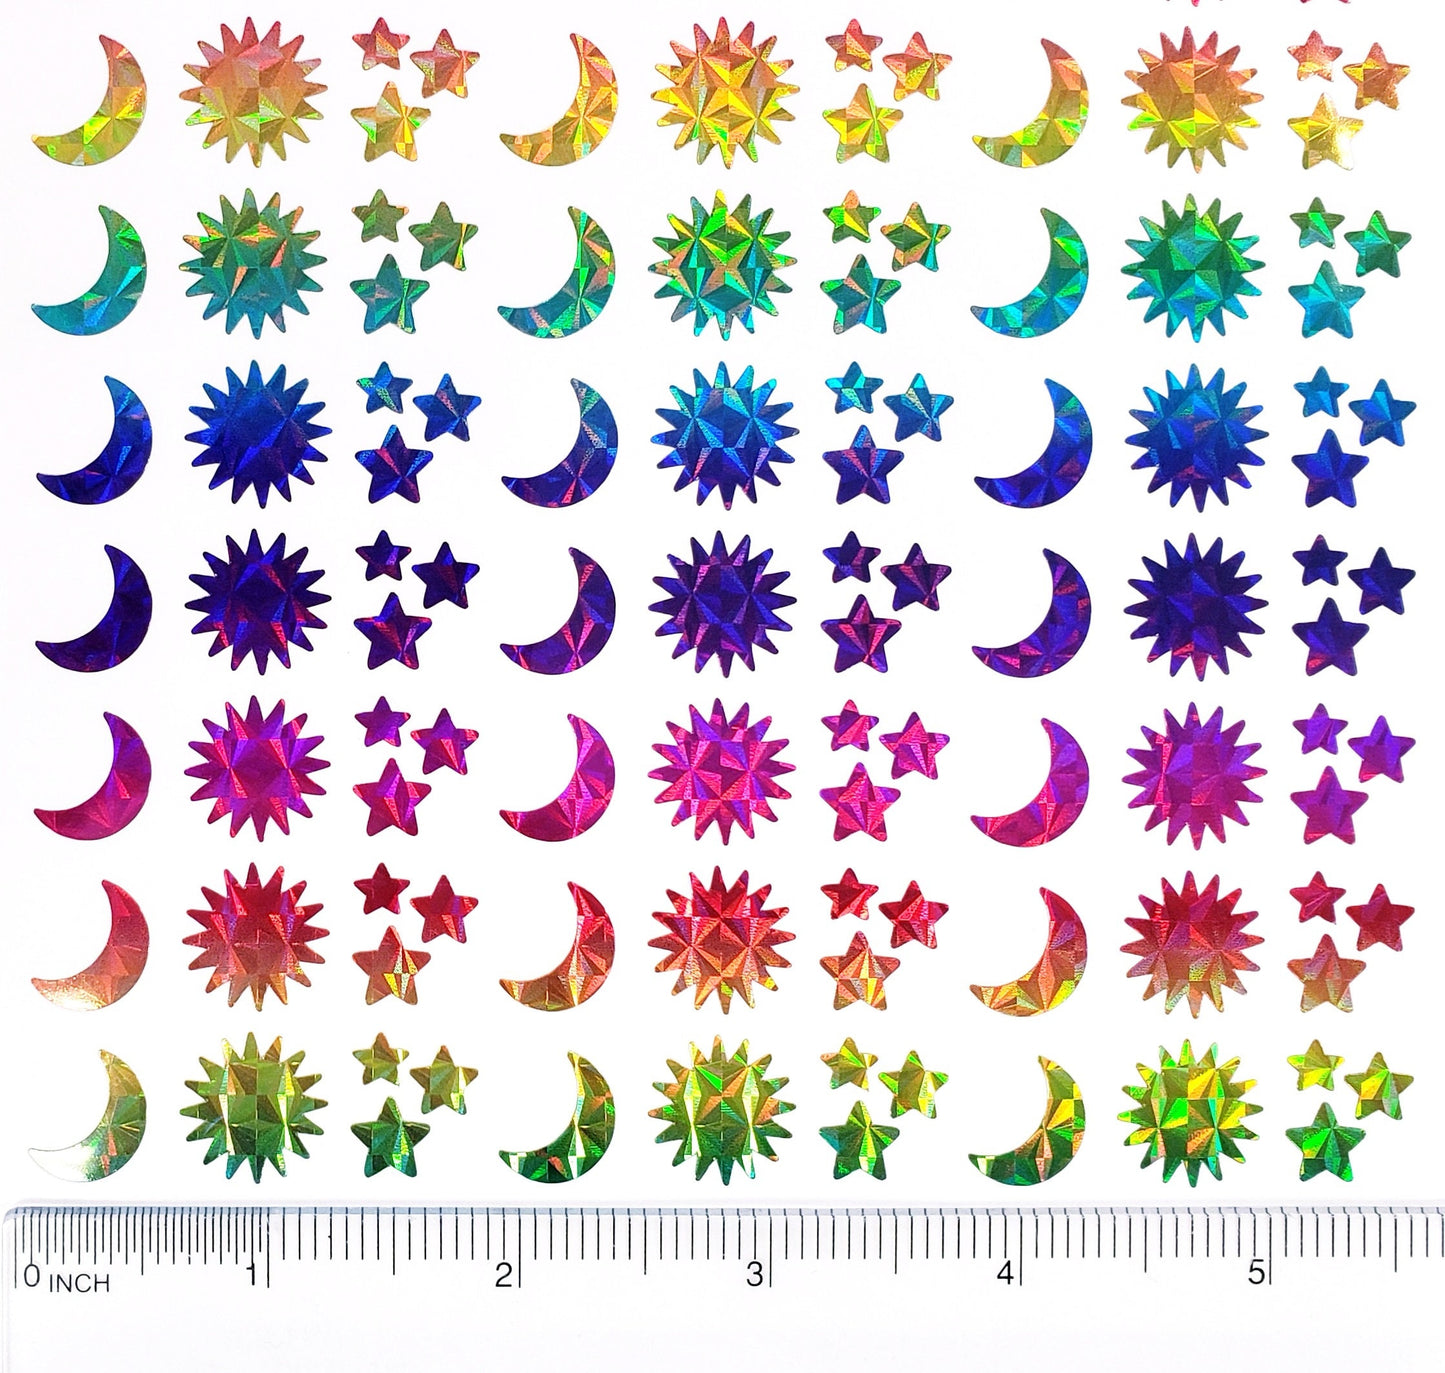 Sun Moon and Star Stickers, set of 25, 50 or 100 small sparkly rainbow vinyl decals, celestial theme stickers for envelopes place cards